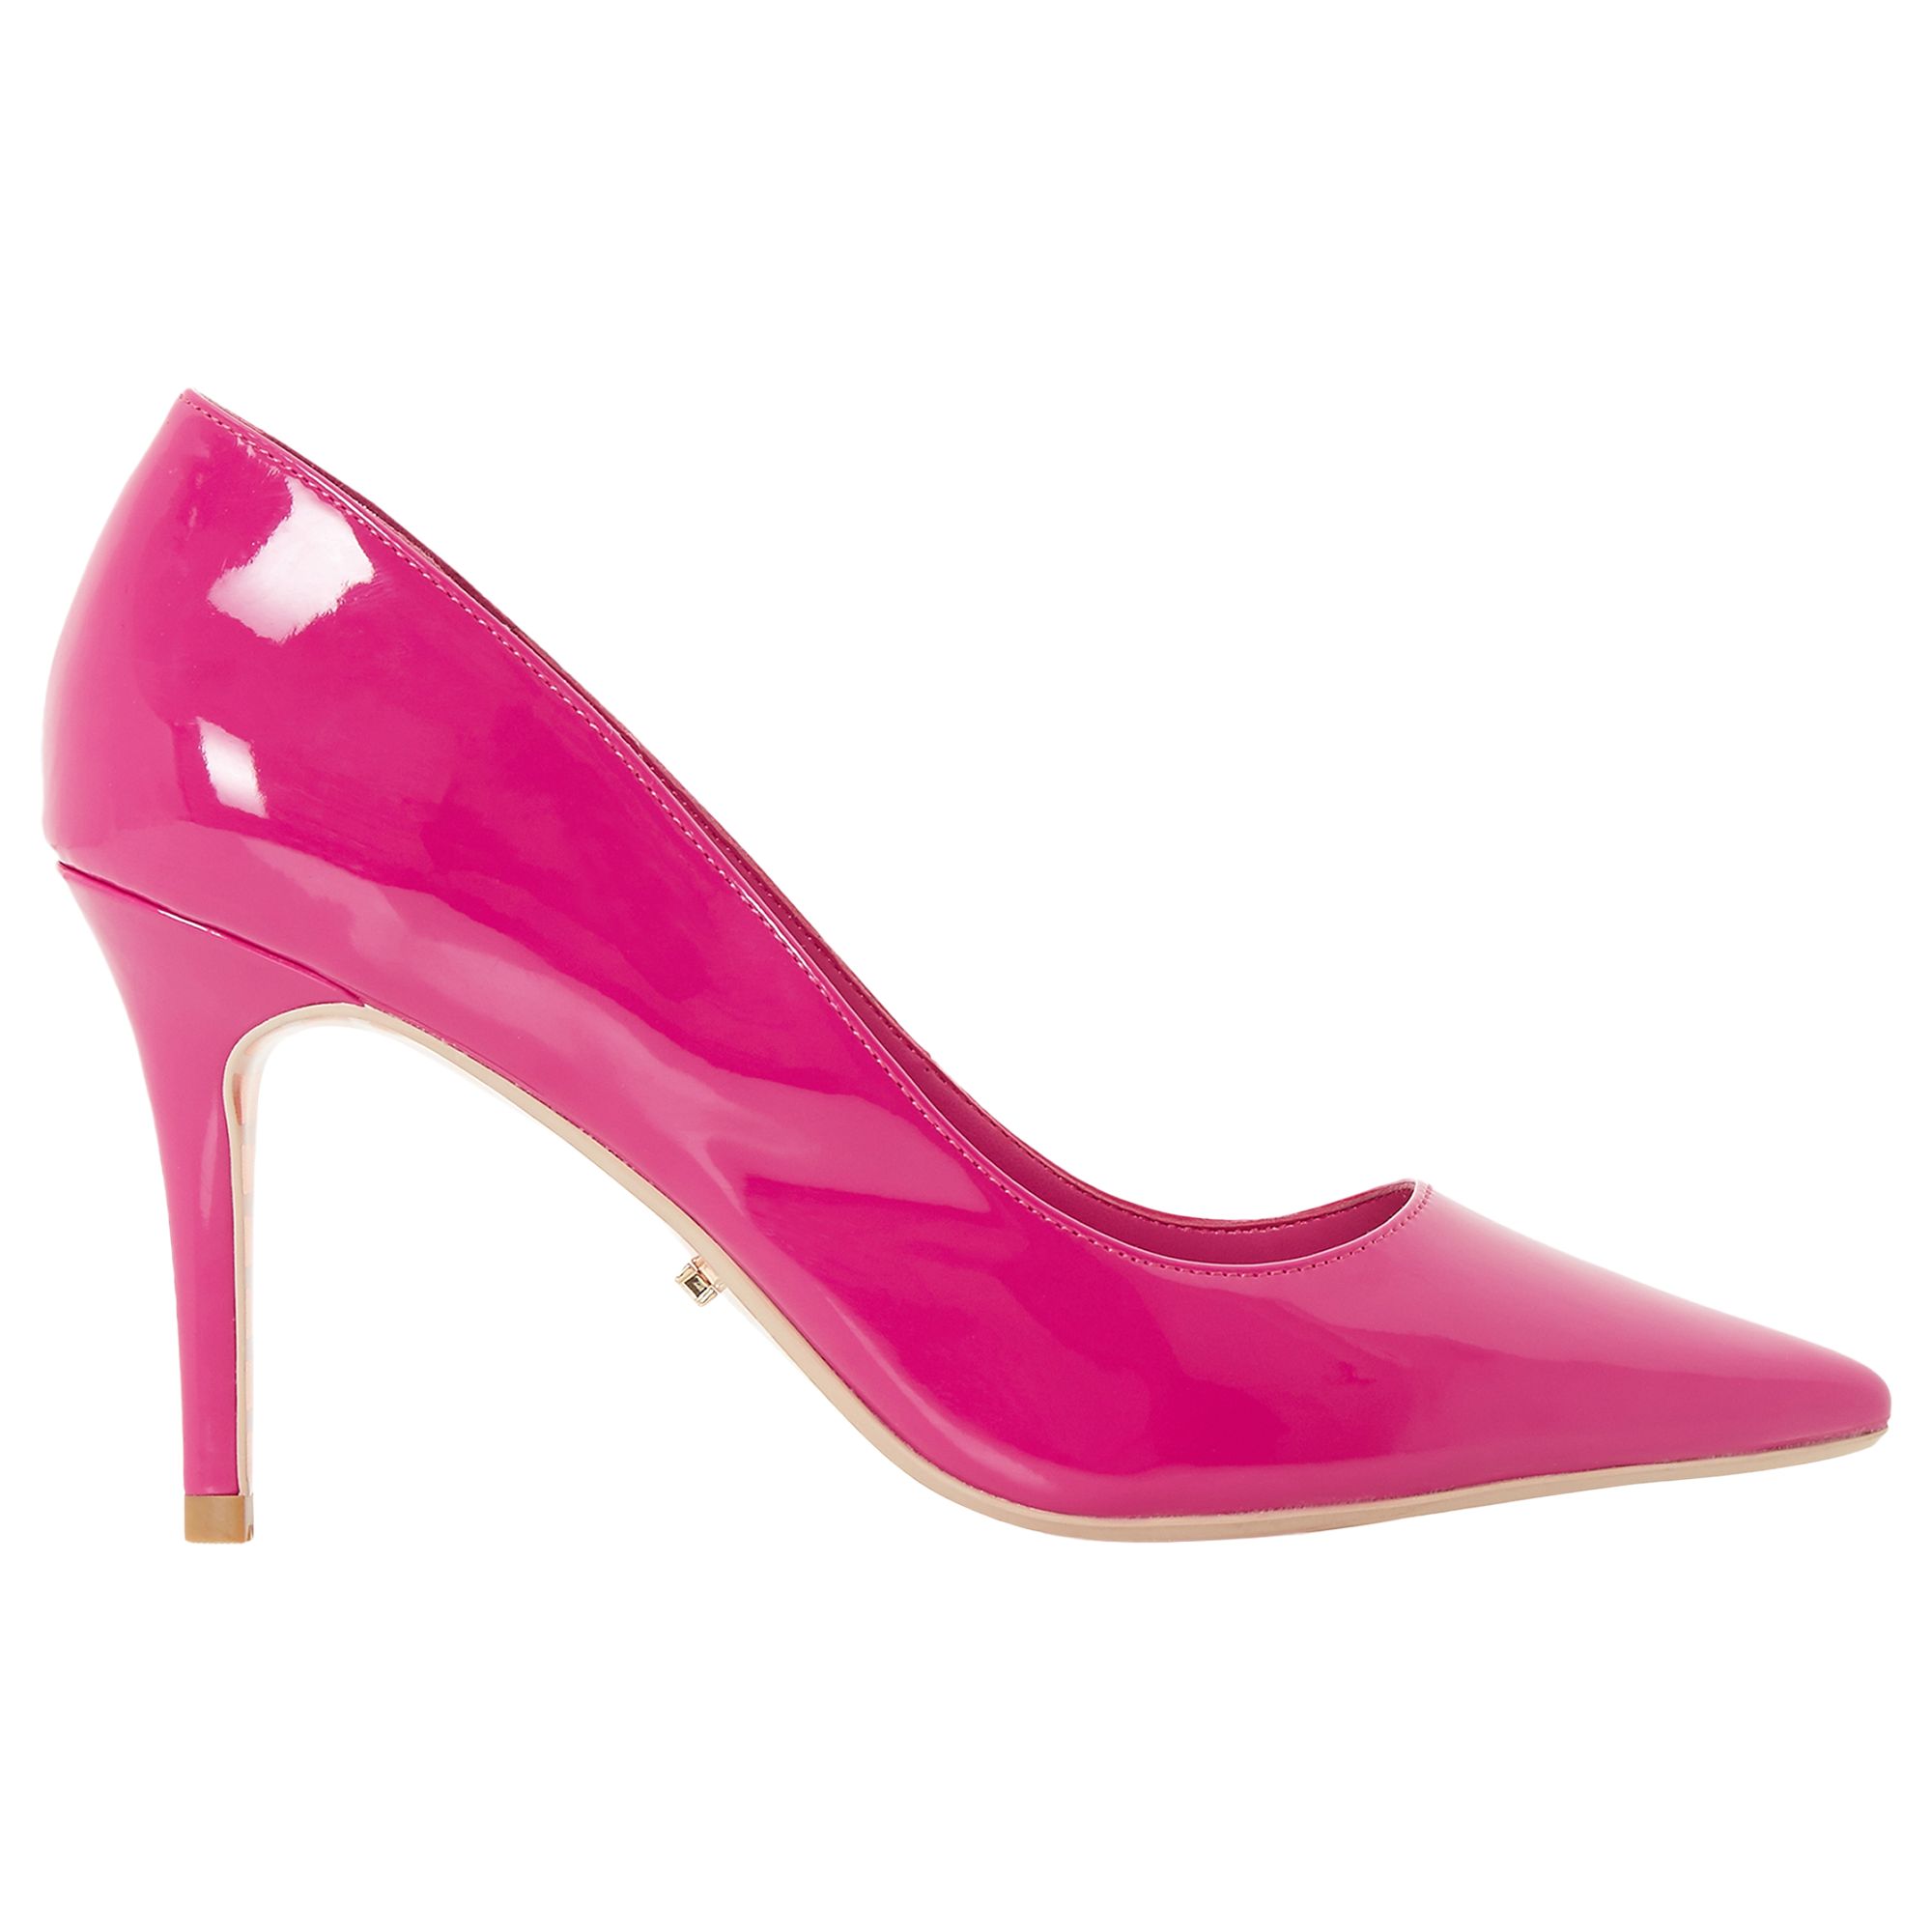 Dune Aurrora Pointed Toe Court Shoes, Pink, 4